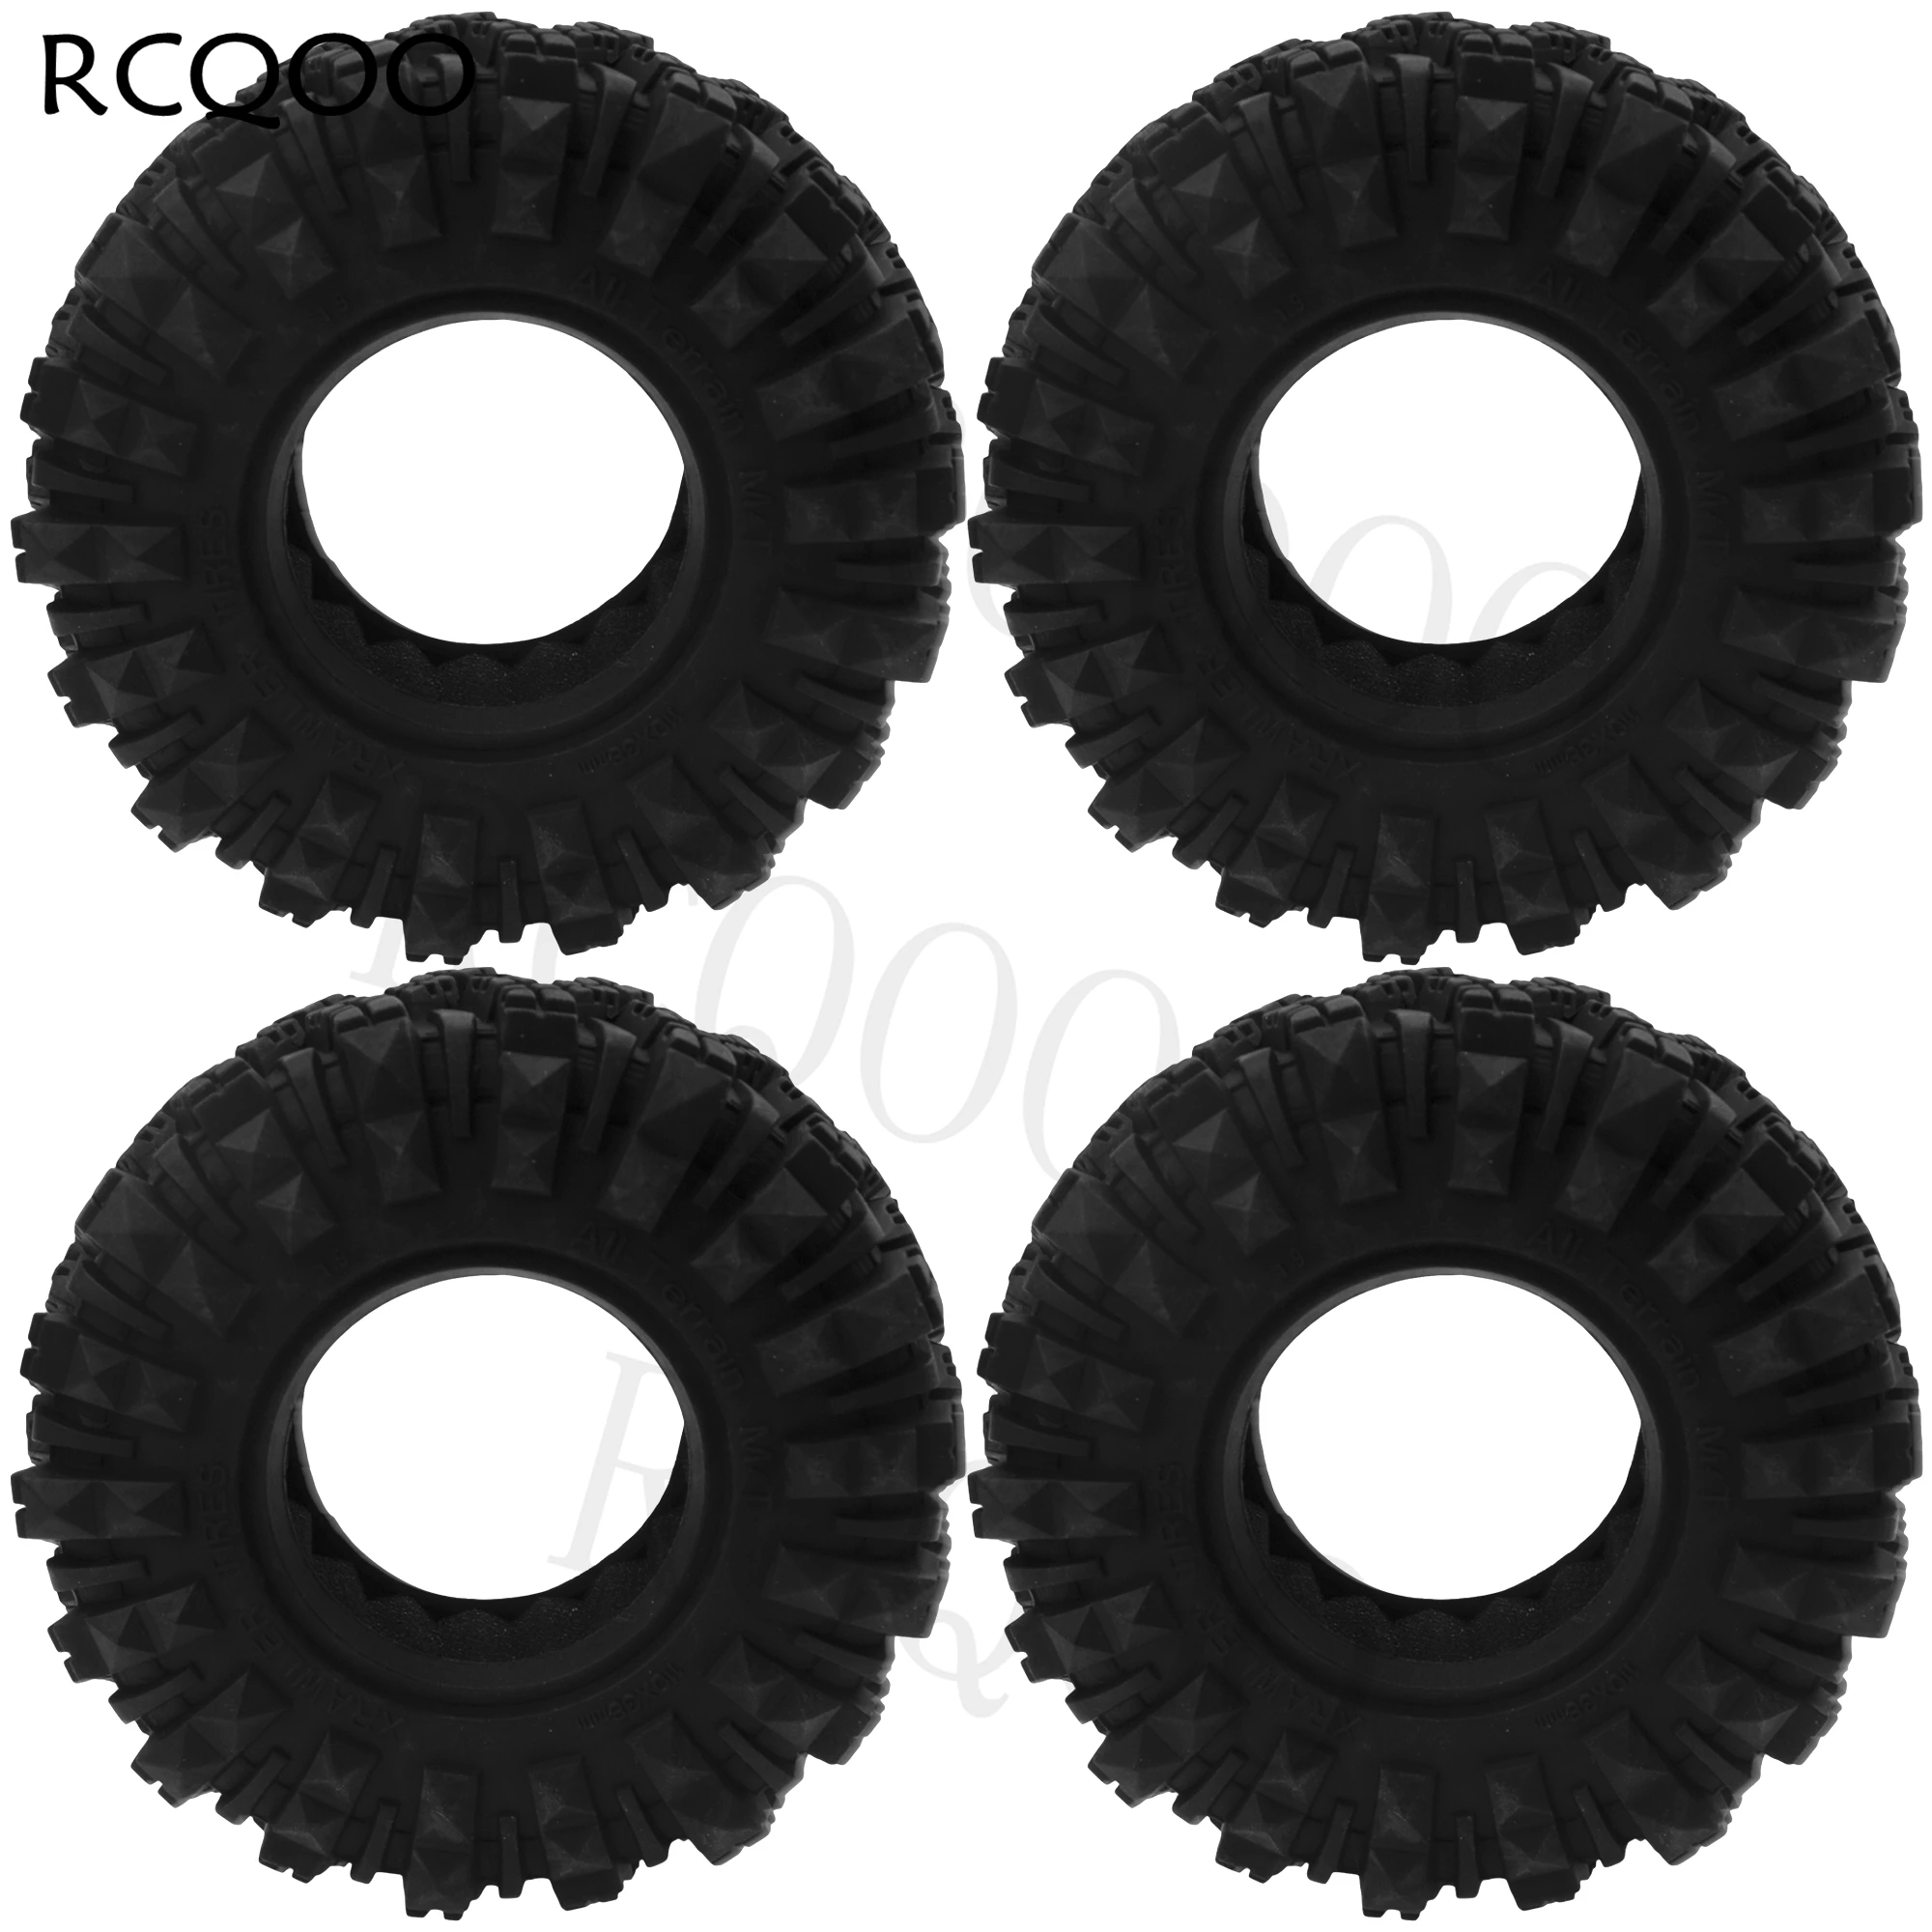 

1.9 inch RC 1.9 Crawler Tires Rubber Mud Tires OD 110mm Tyre for Axial 1/10 RC Crawler Fit 1.9 Beadlock Wheel Rims